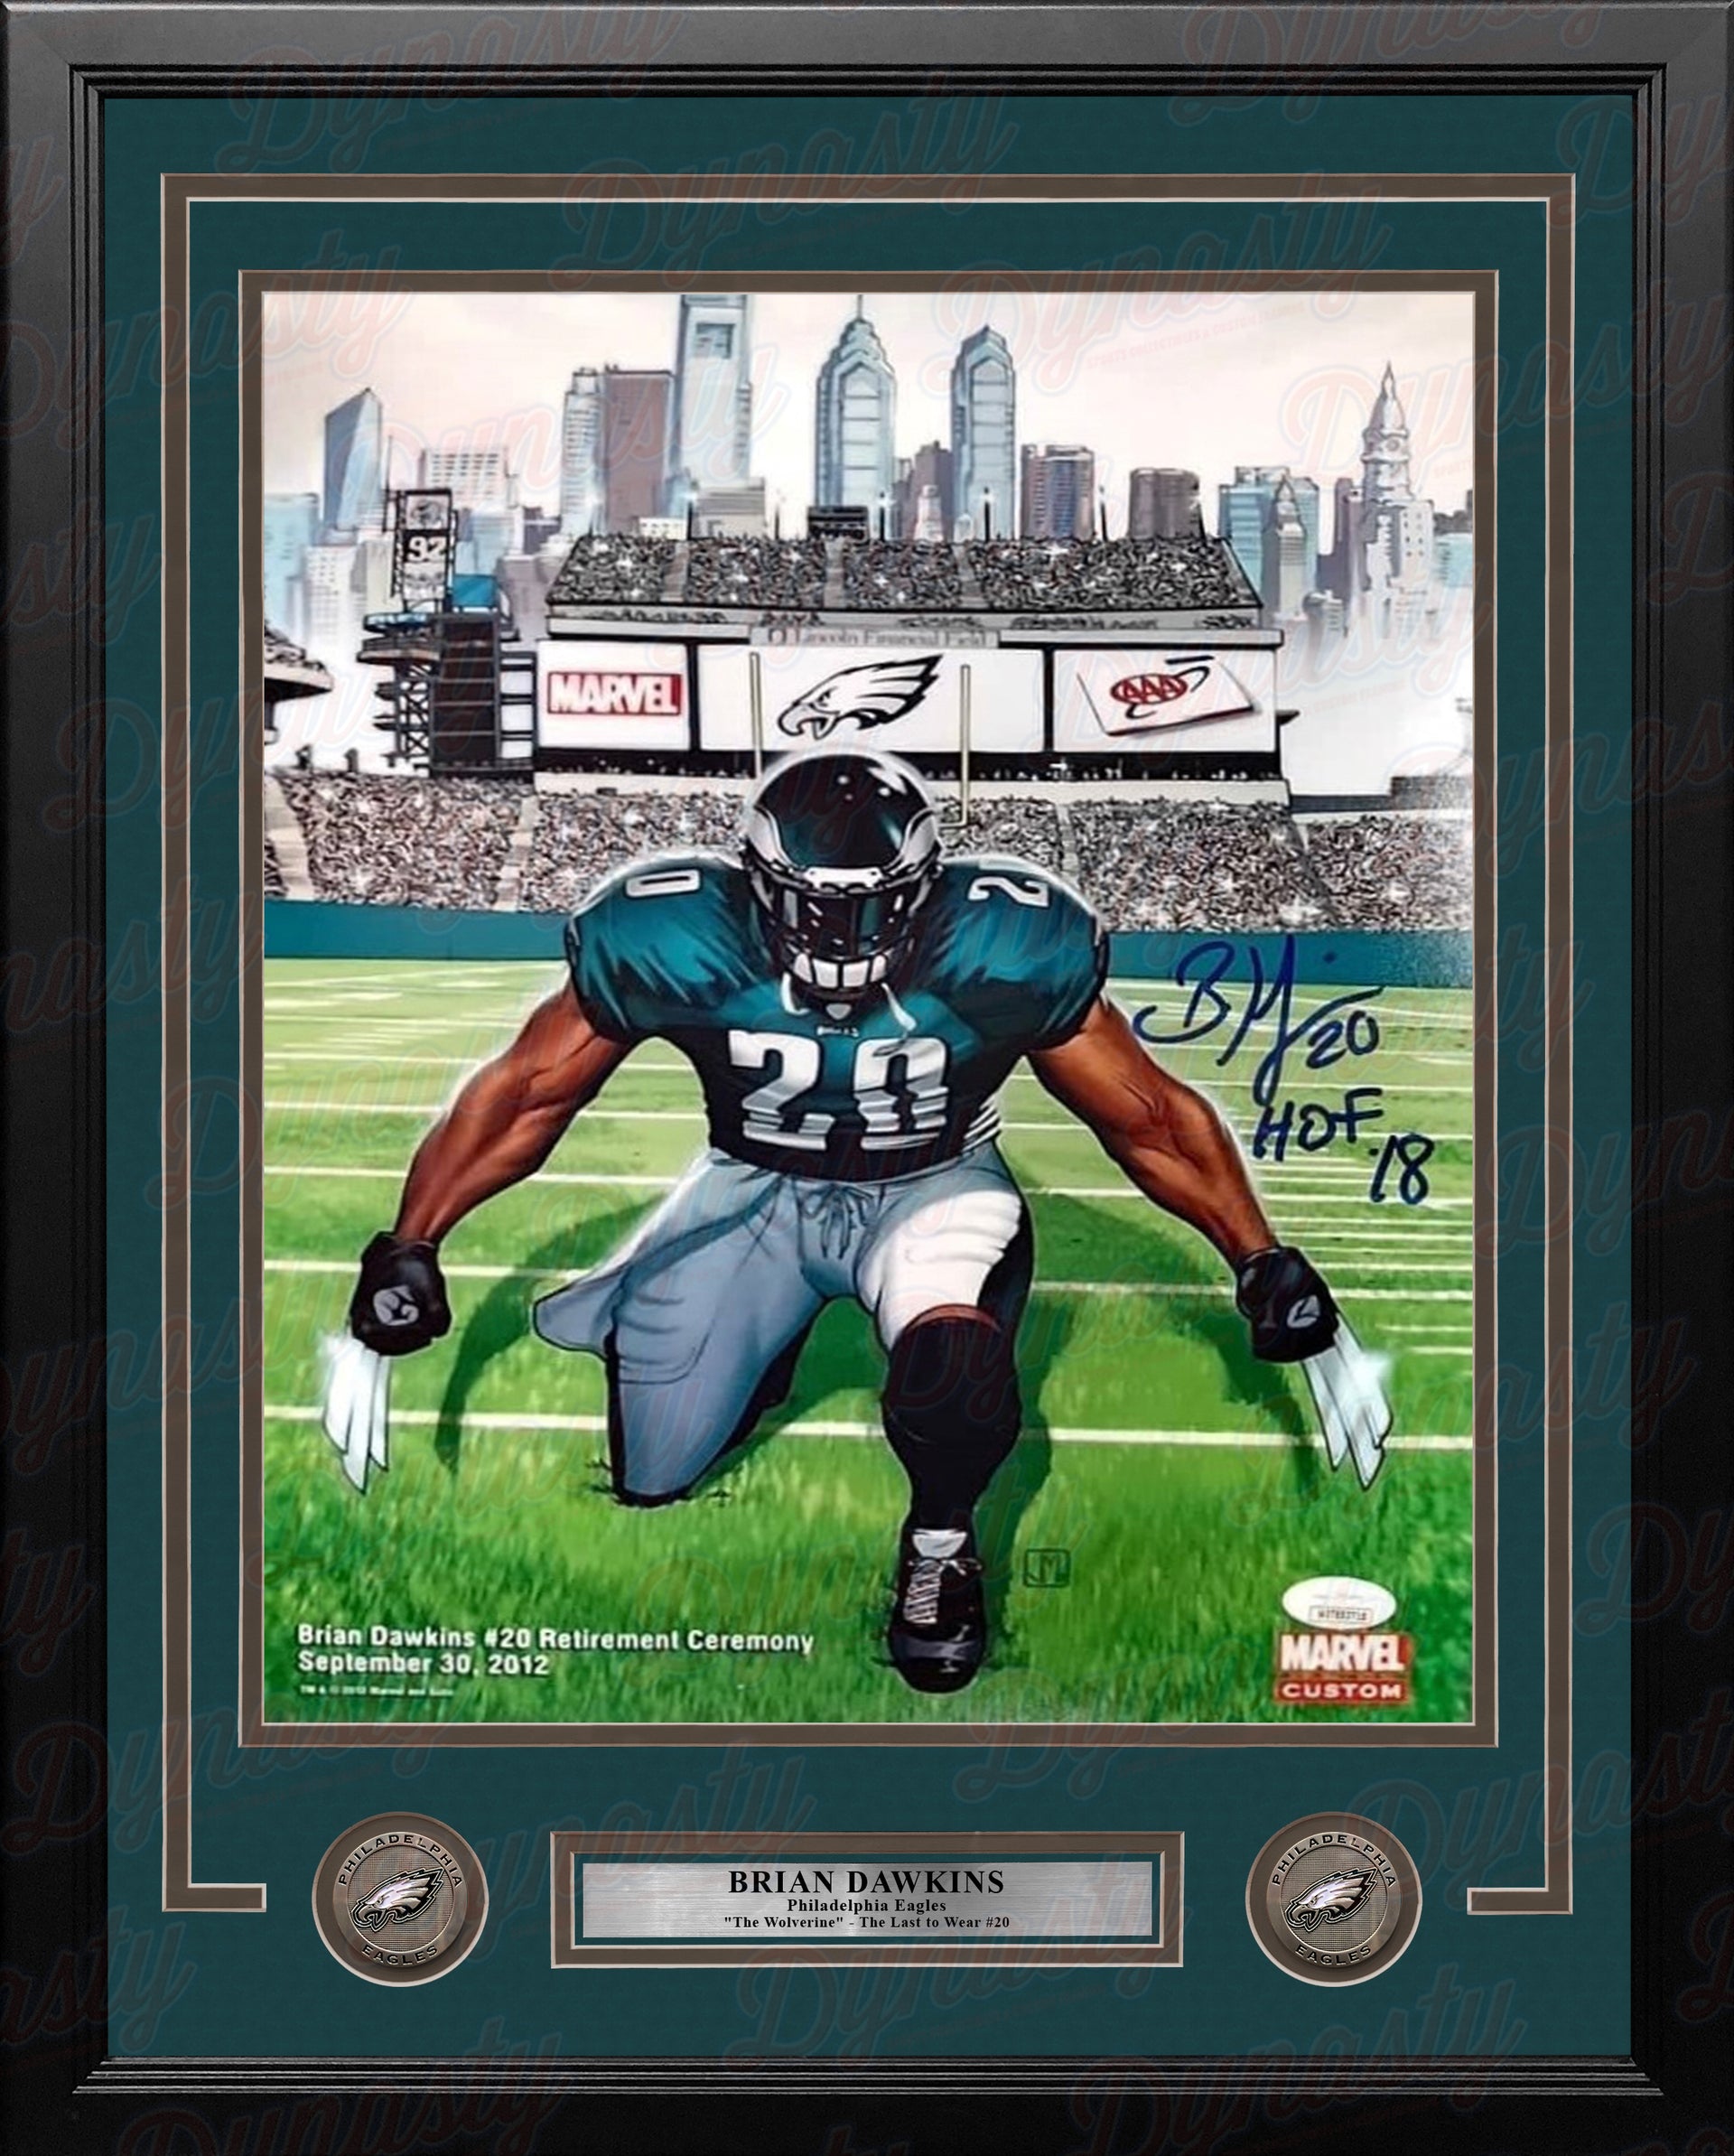 Brian Dawkins Wolverine Retirement Collage Philadelphia Eagles Autographed 11x14 Framed Photo Inscribed Hall of Fame - Dynasty Sports & Framing 